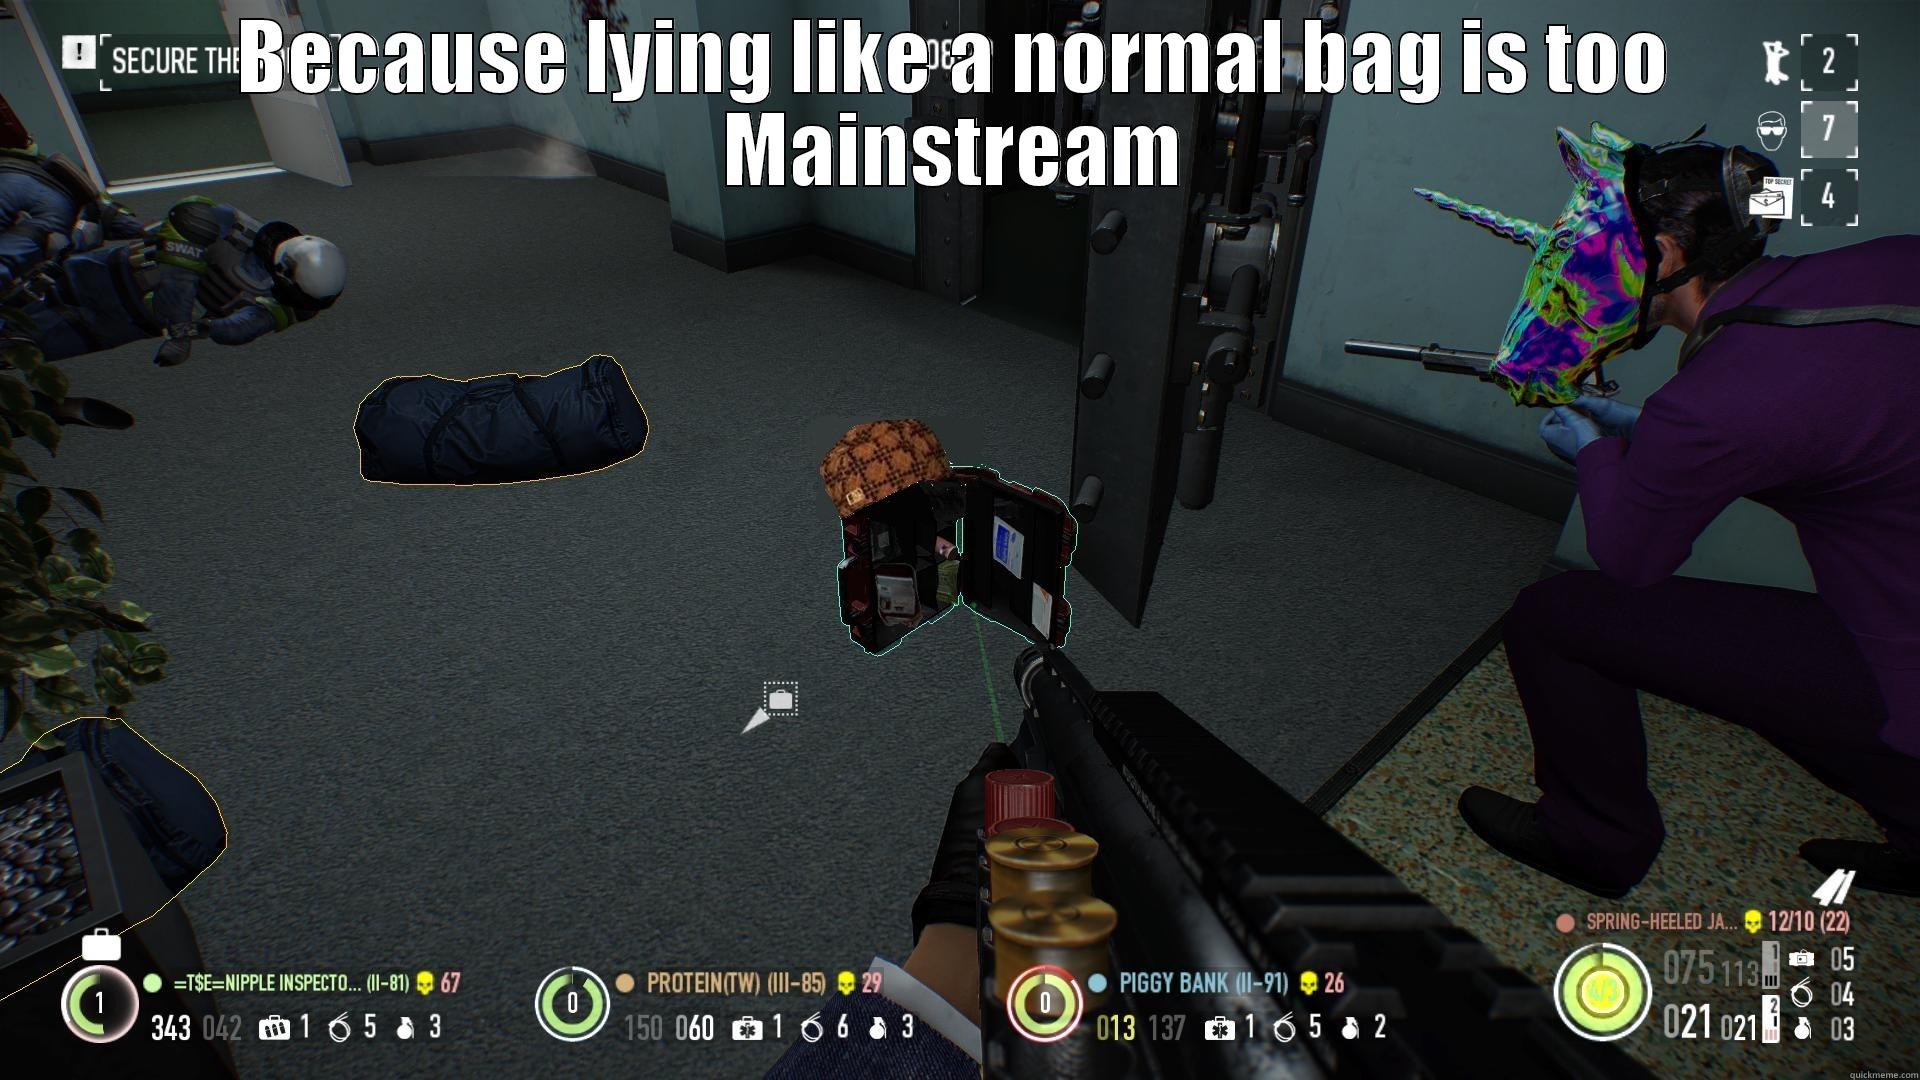 Hipster Medic Bag - BECAUSE LYING LIKE A NORMAL BAG IS TOO MAINSTREAM  Misc